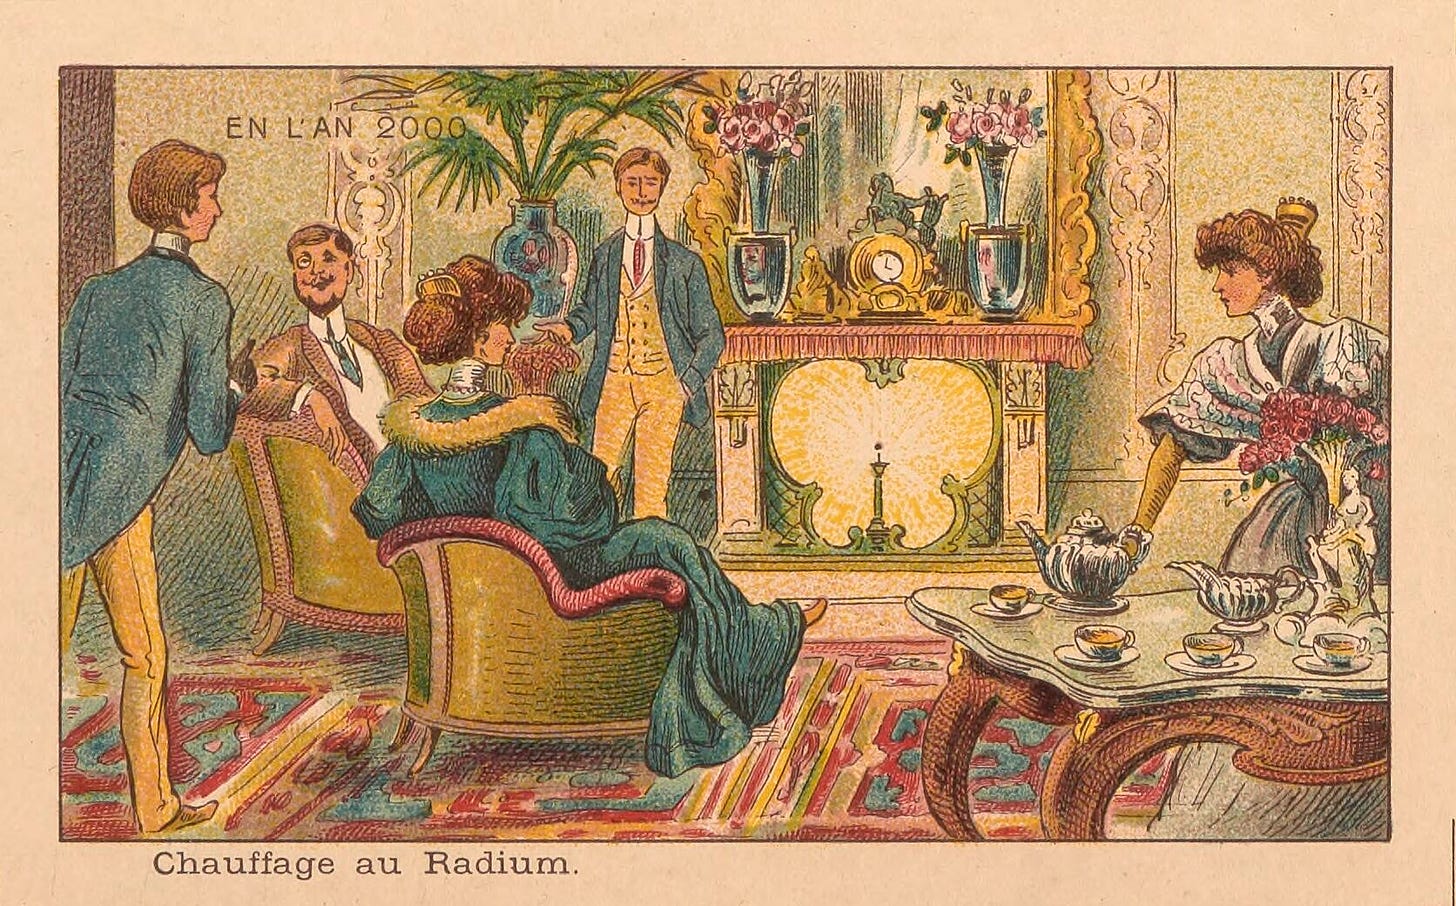 Five people having tea in what appears to be a turn-of-the century French salon around a fireplace illuminated by a piece of glowing metal. The postcard says "En l'an 2000" and has the caption, "Chauffage au Radium."